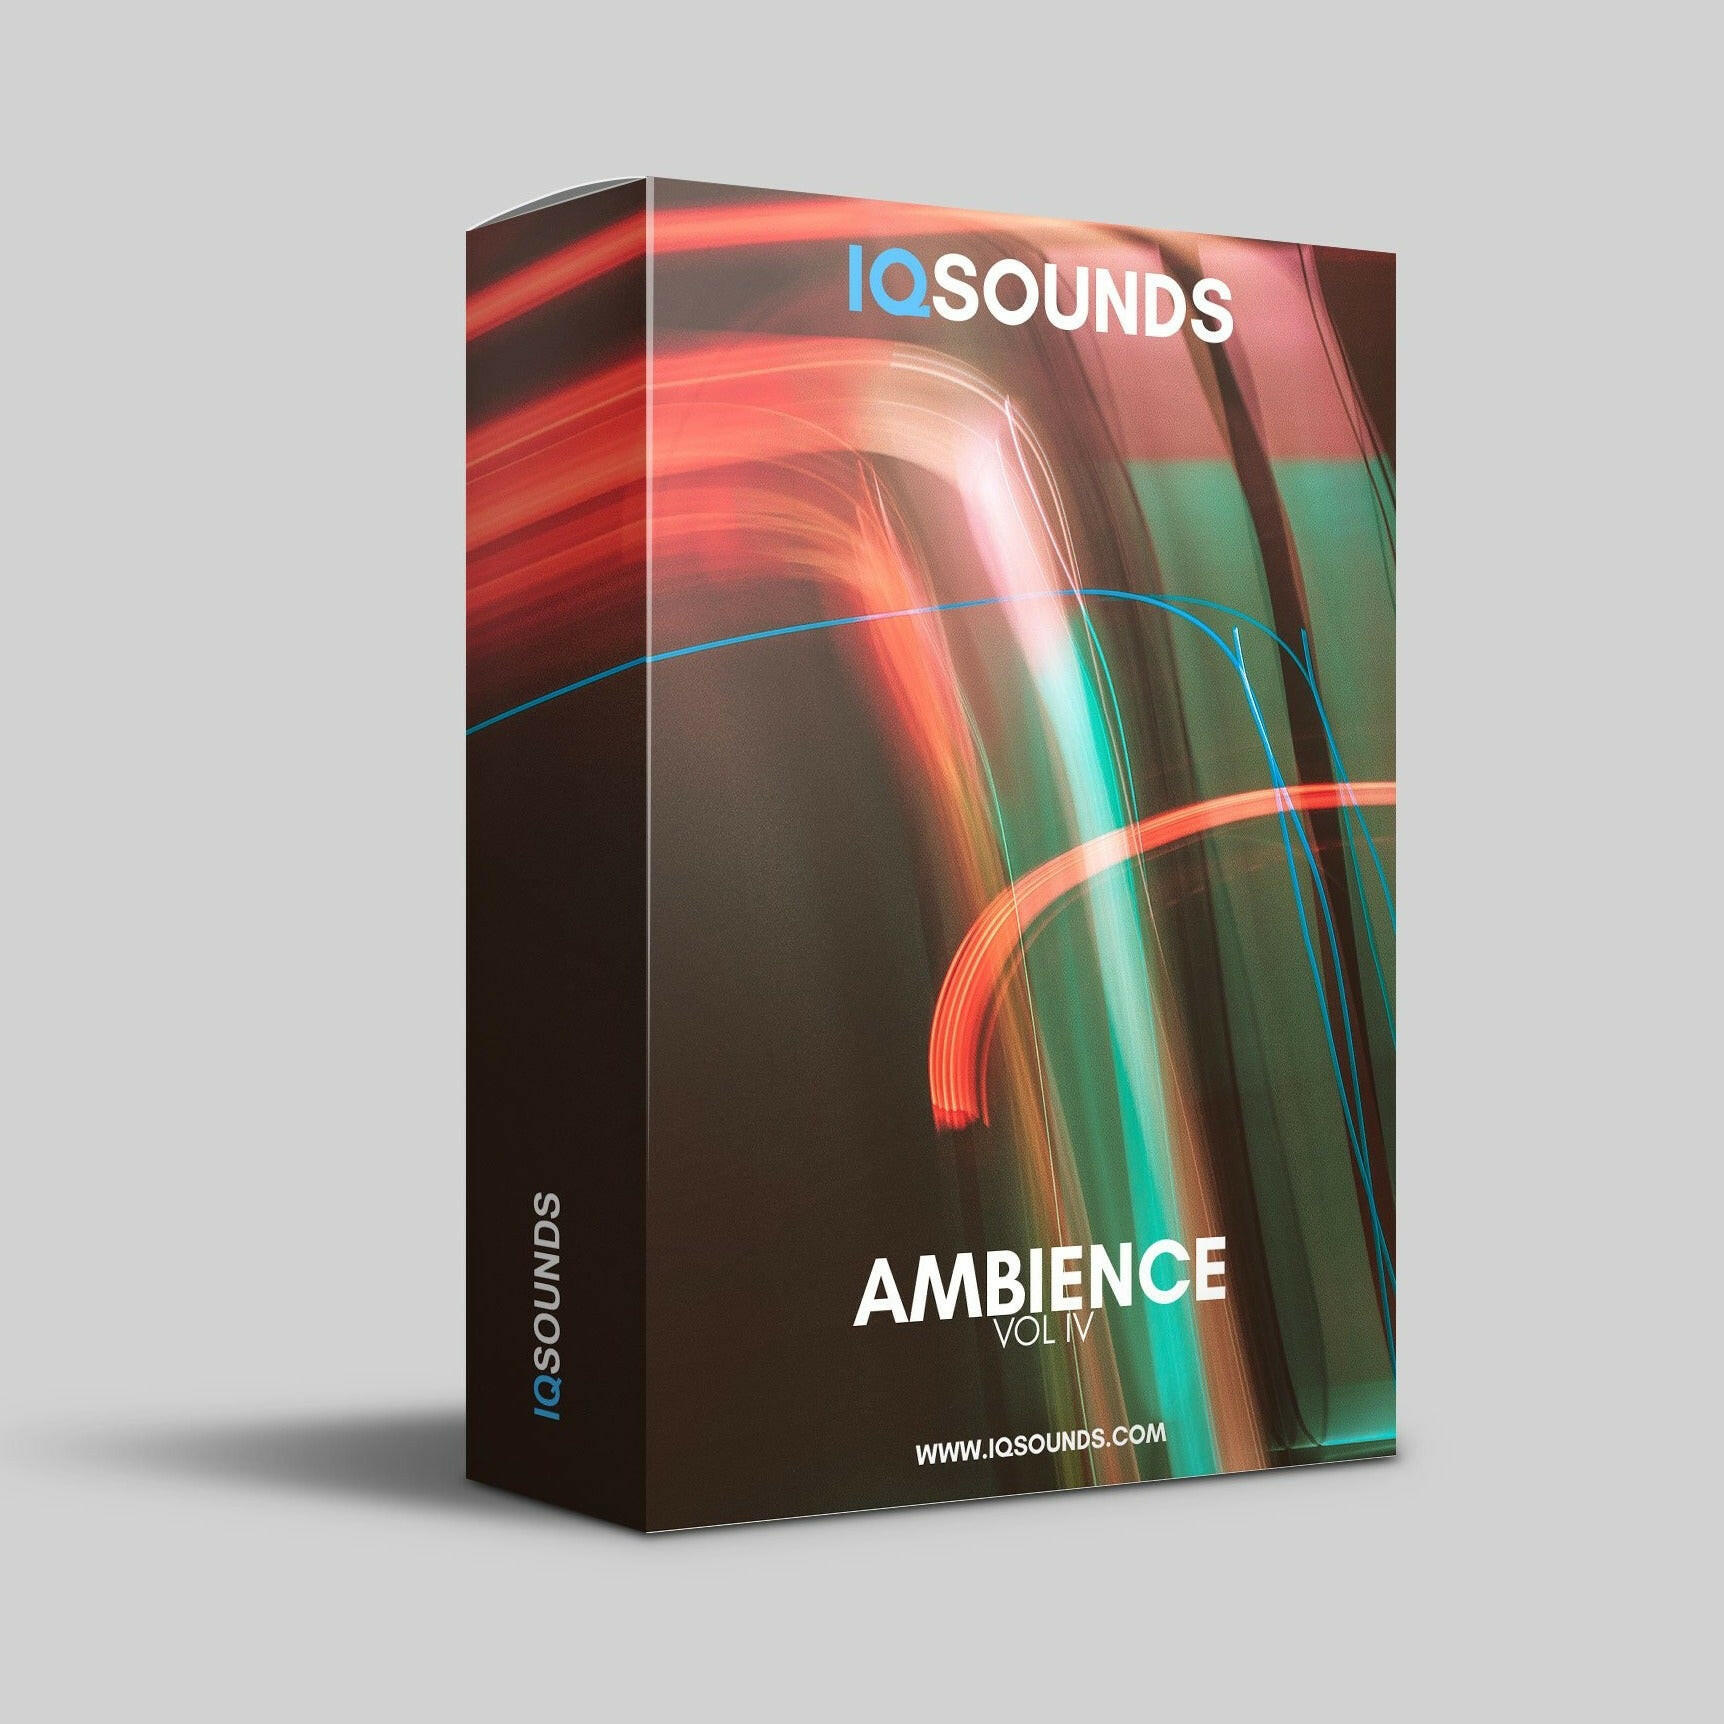 iqsounds, iq sounds, sample pack, ambient samples, ambient sample pack, ableton samples, fl studio samples, drum samples, free sample pack, film scoring samples, film scoring soundtrack, sound fx